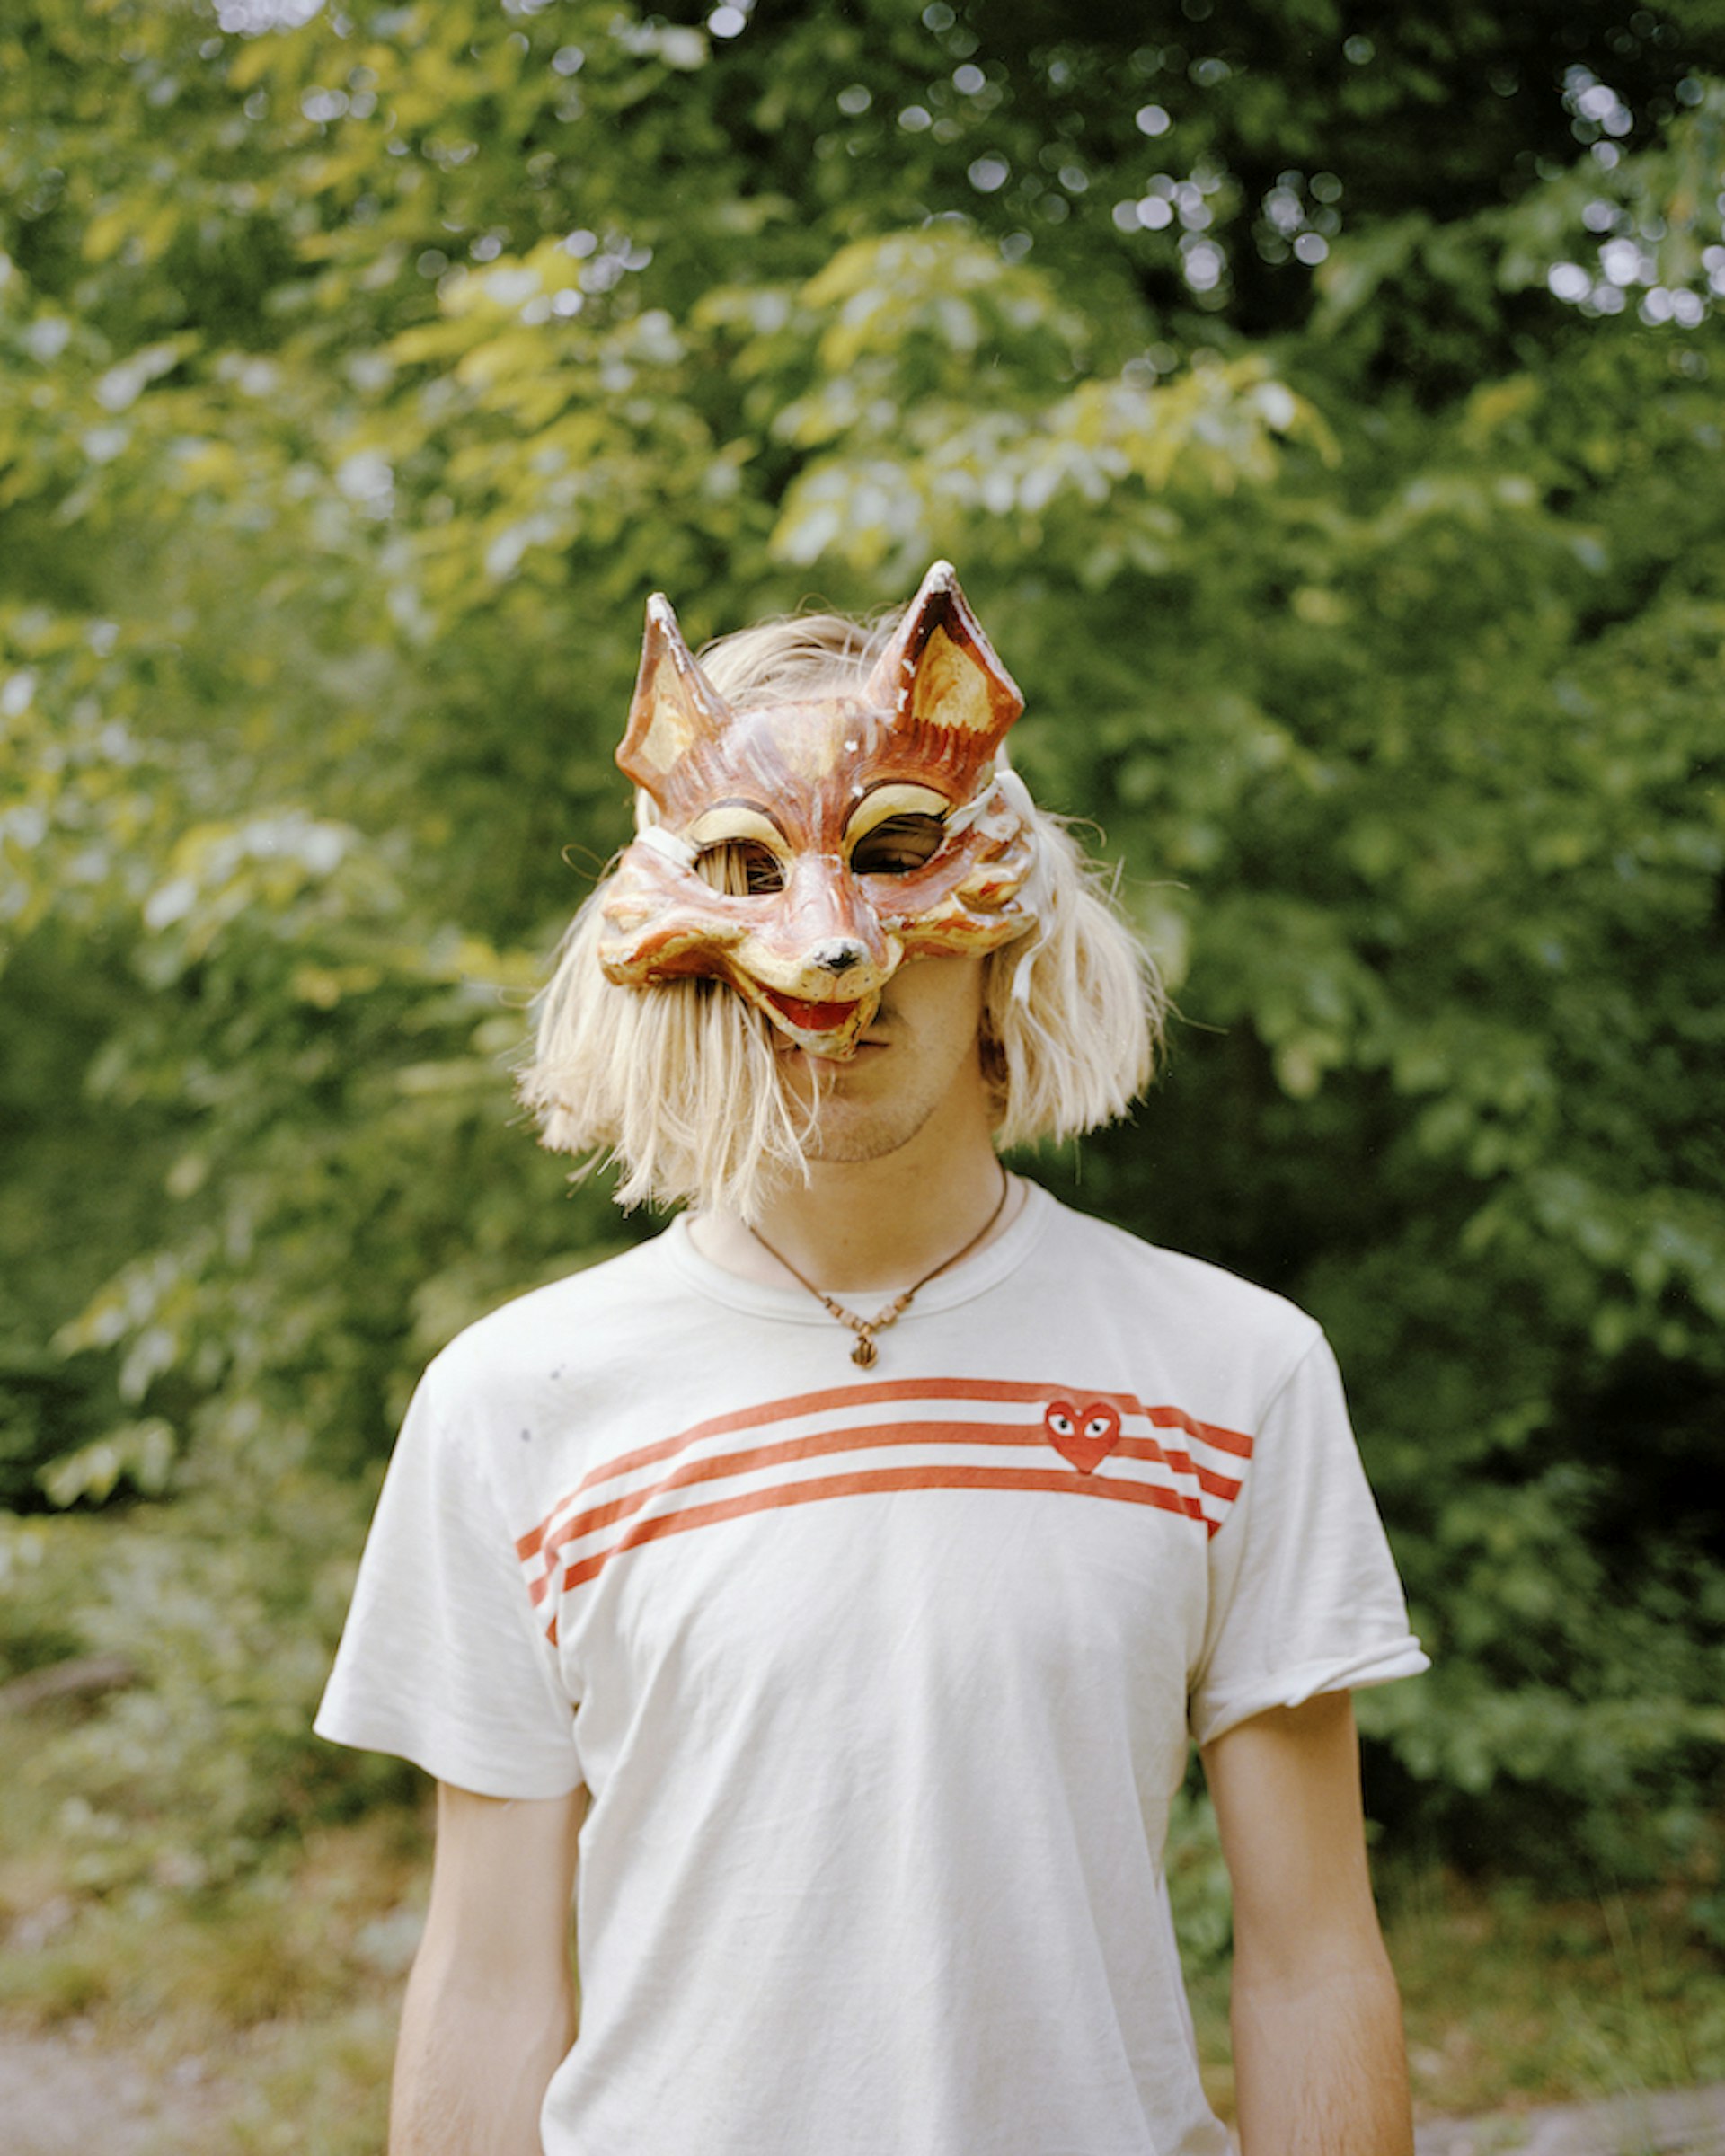 A young man poses for a portrait with a fox mask covering the top of her face